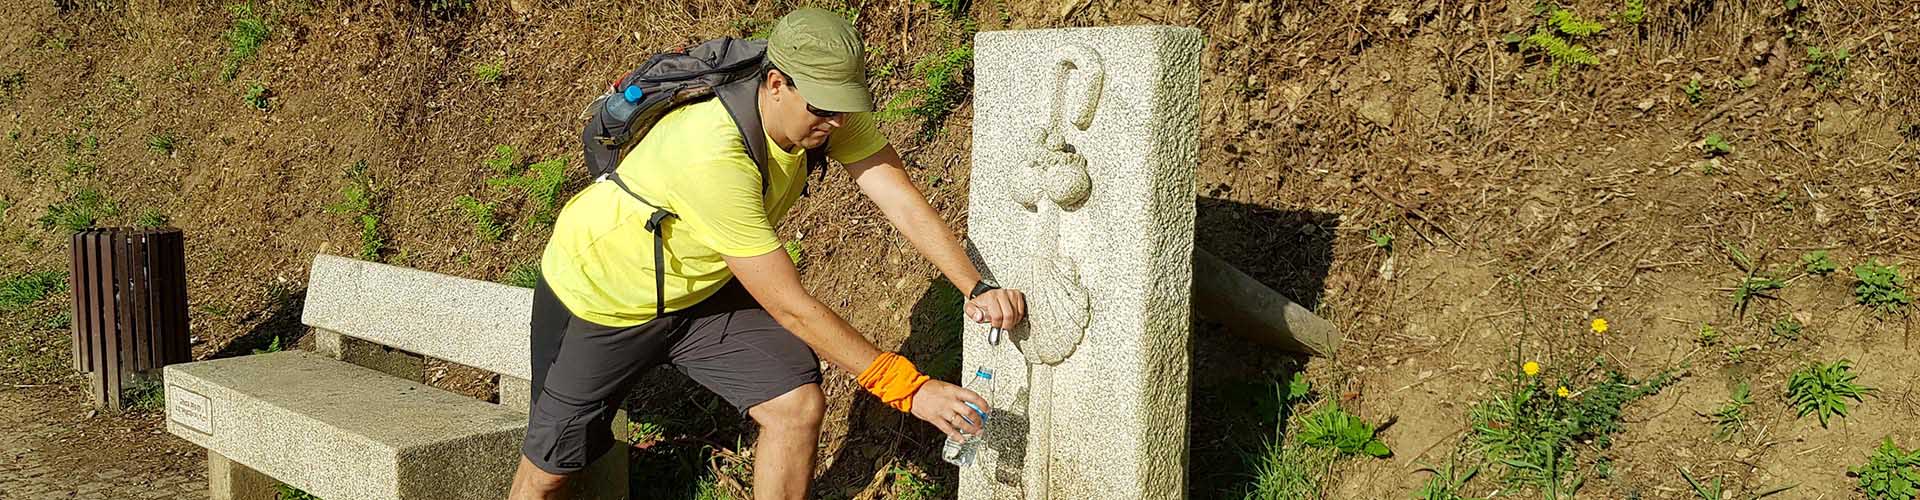 pilgrim refilling water on the way from Tui on the portuguese camino